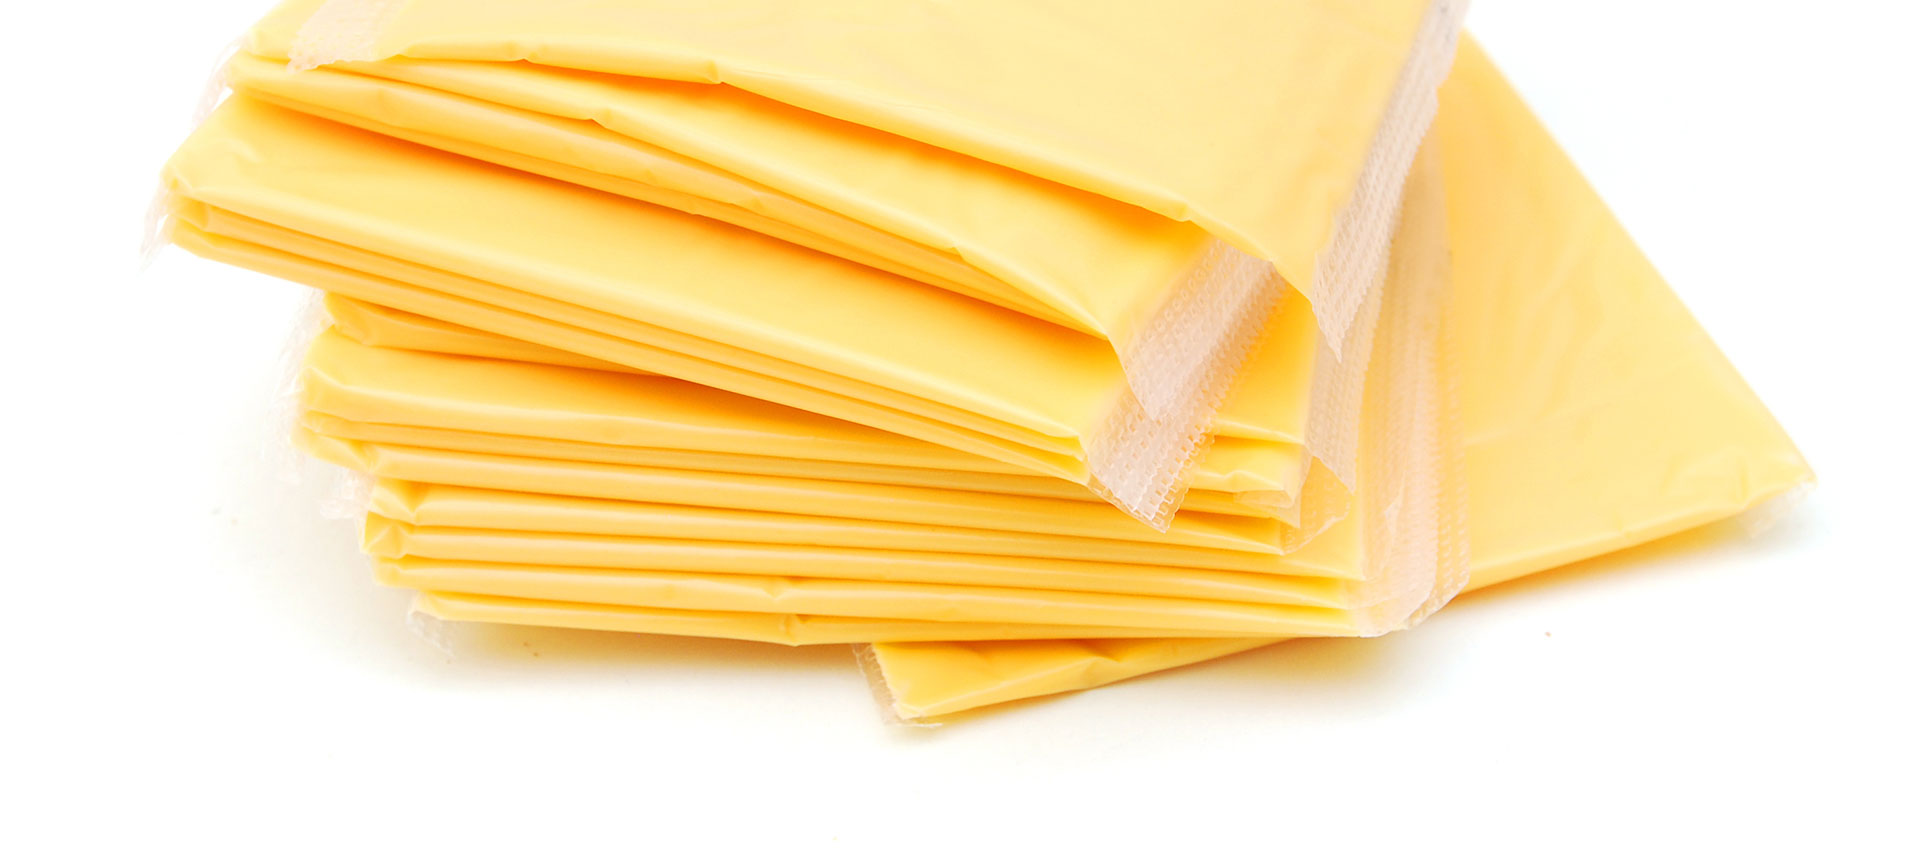 Processed-cheese